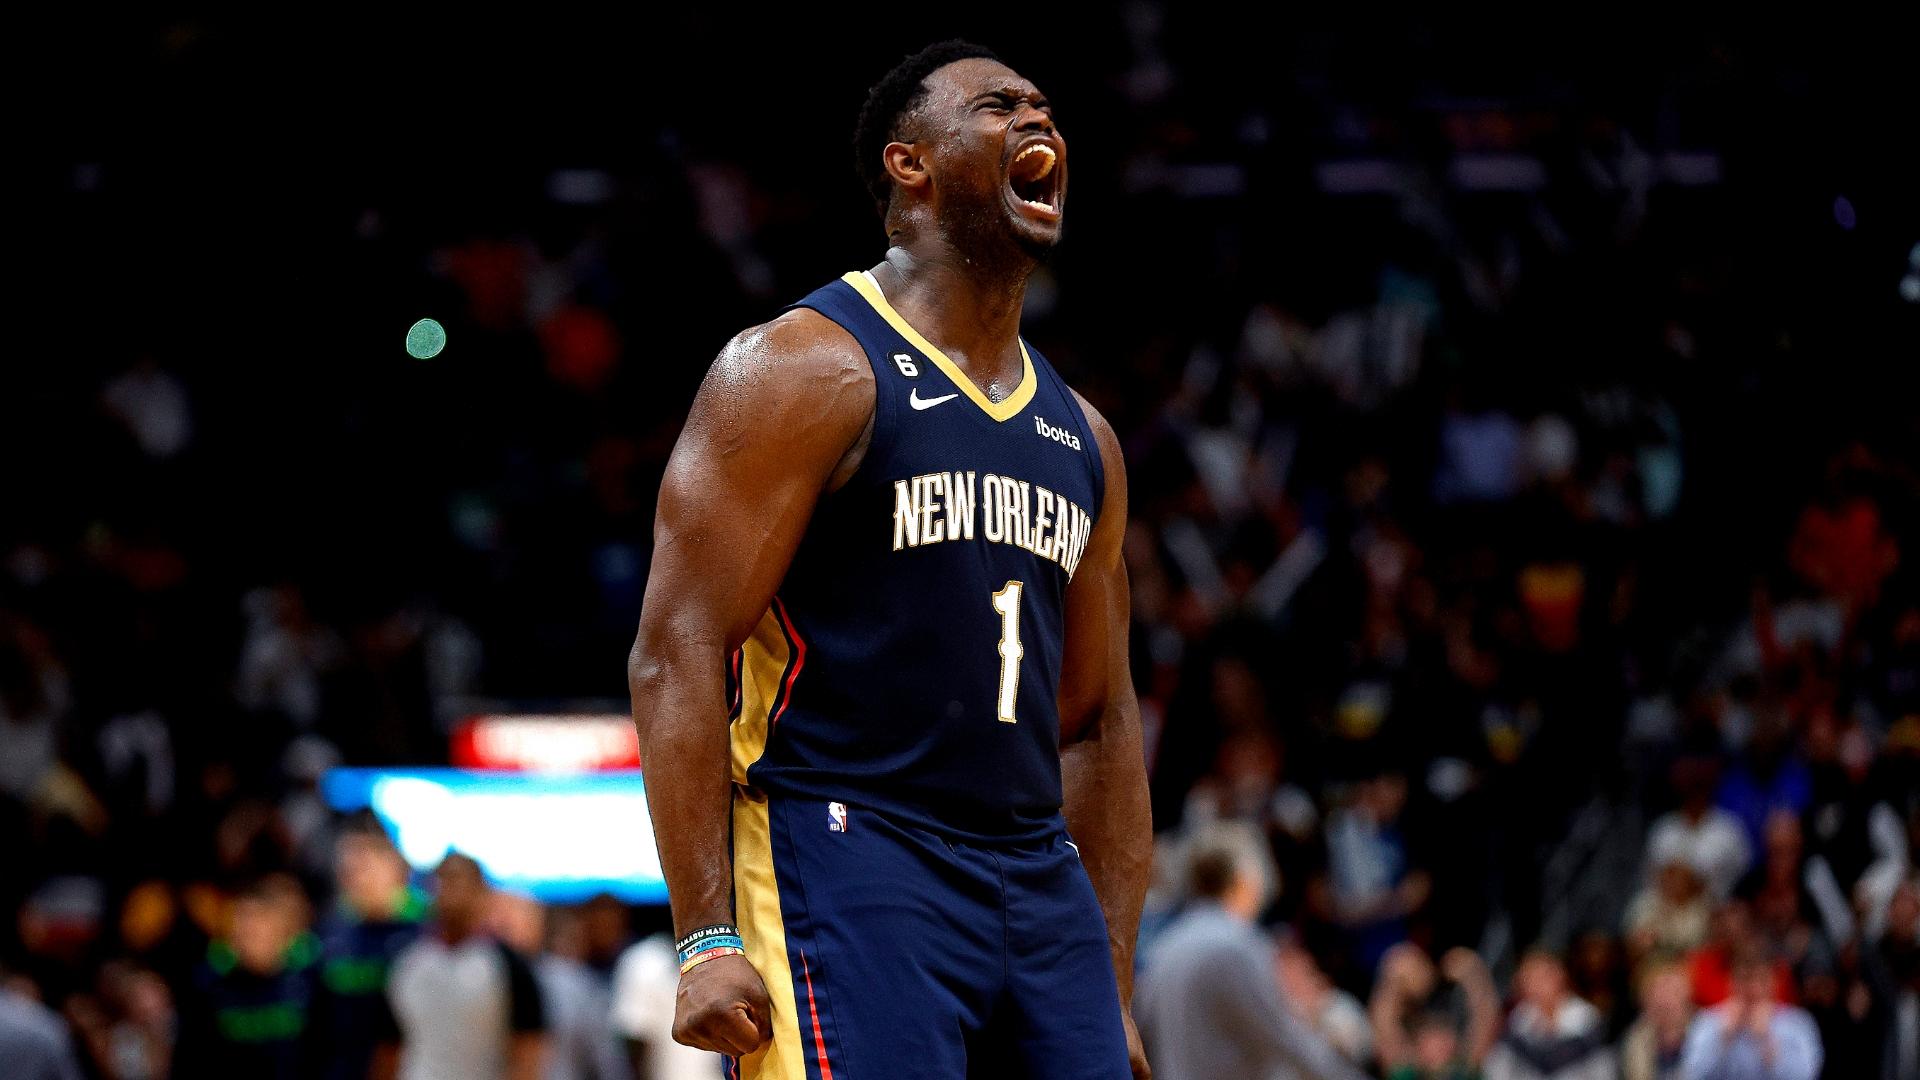 That One Play: Why nobody can stop Pelicans star Zion Williamson from scoring at the basket